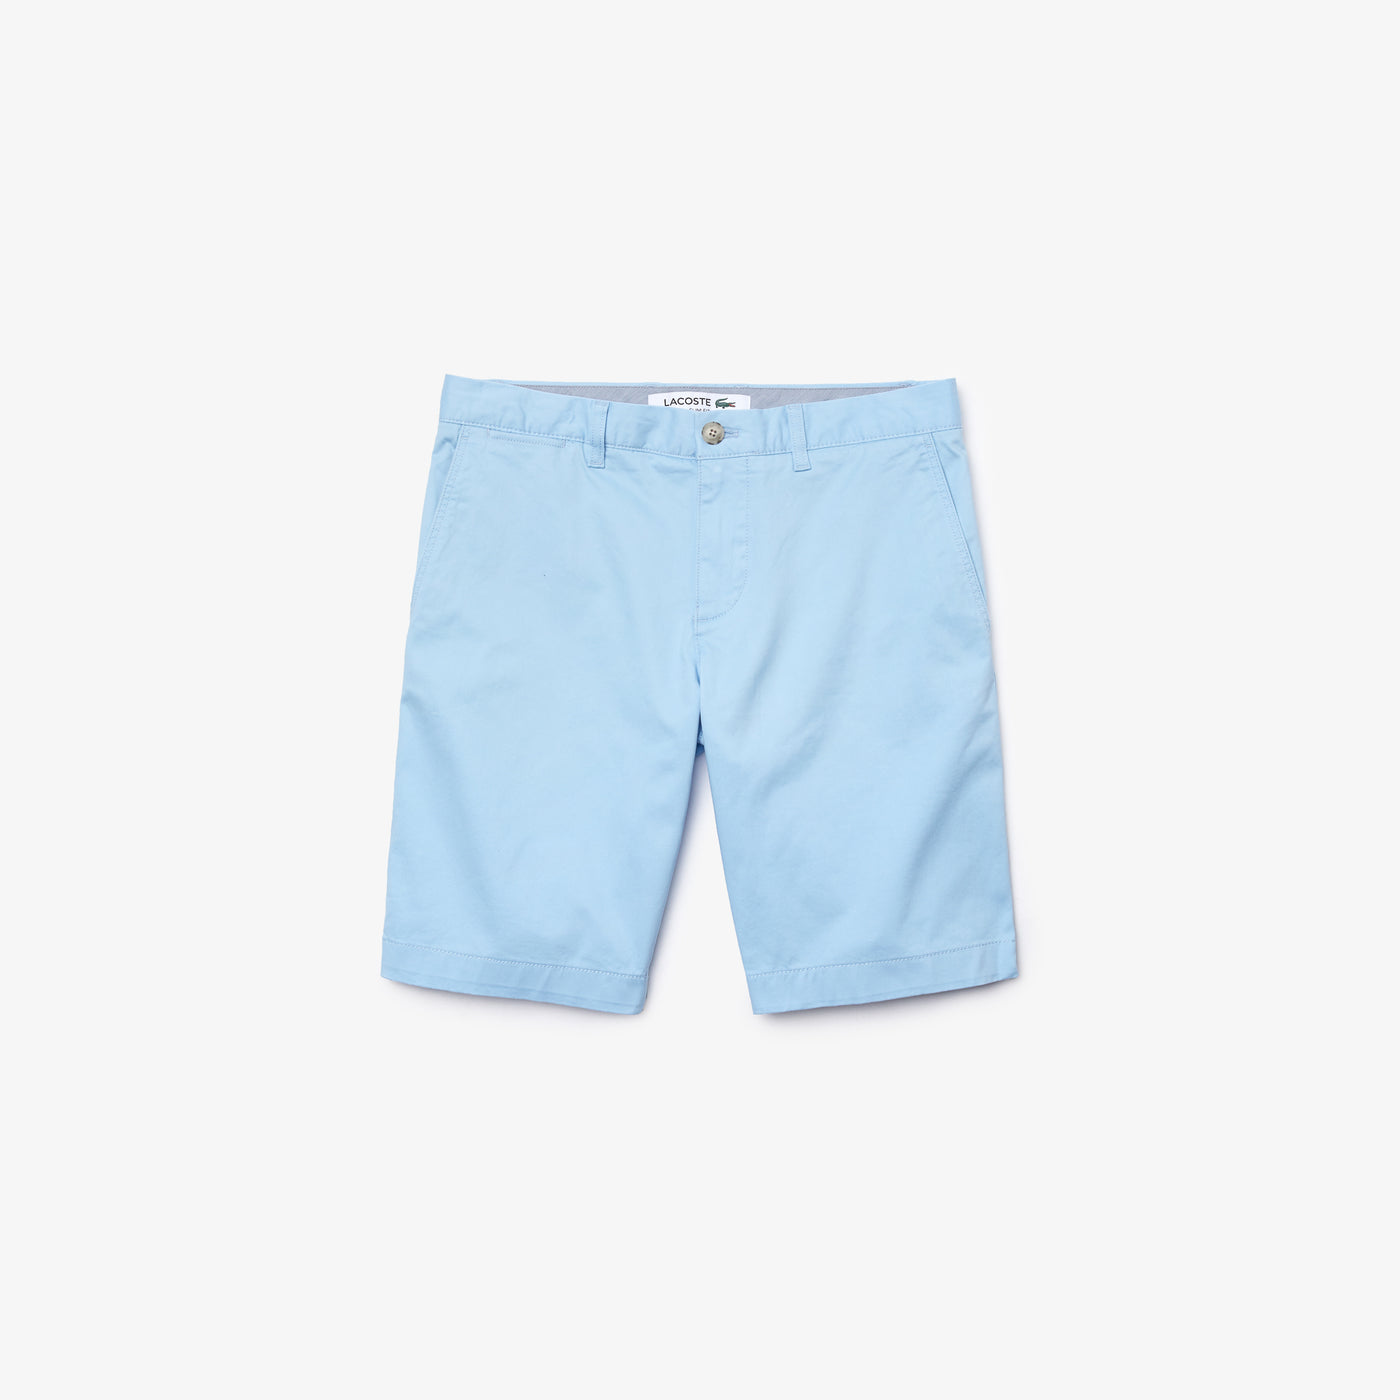 Shop The Latest Collection Of Lacoste Men'S Slim Fit Stretch Gabardine Bermuda Shorts - Fh9542 In Lebanon